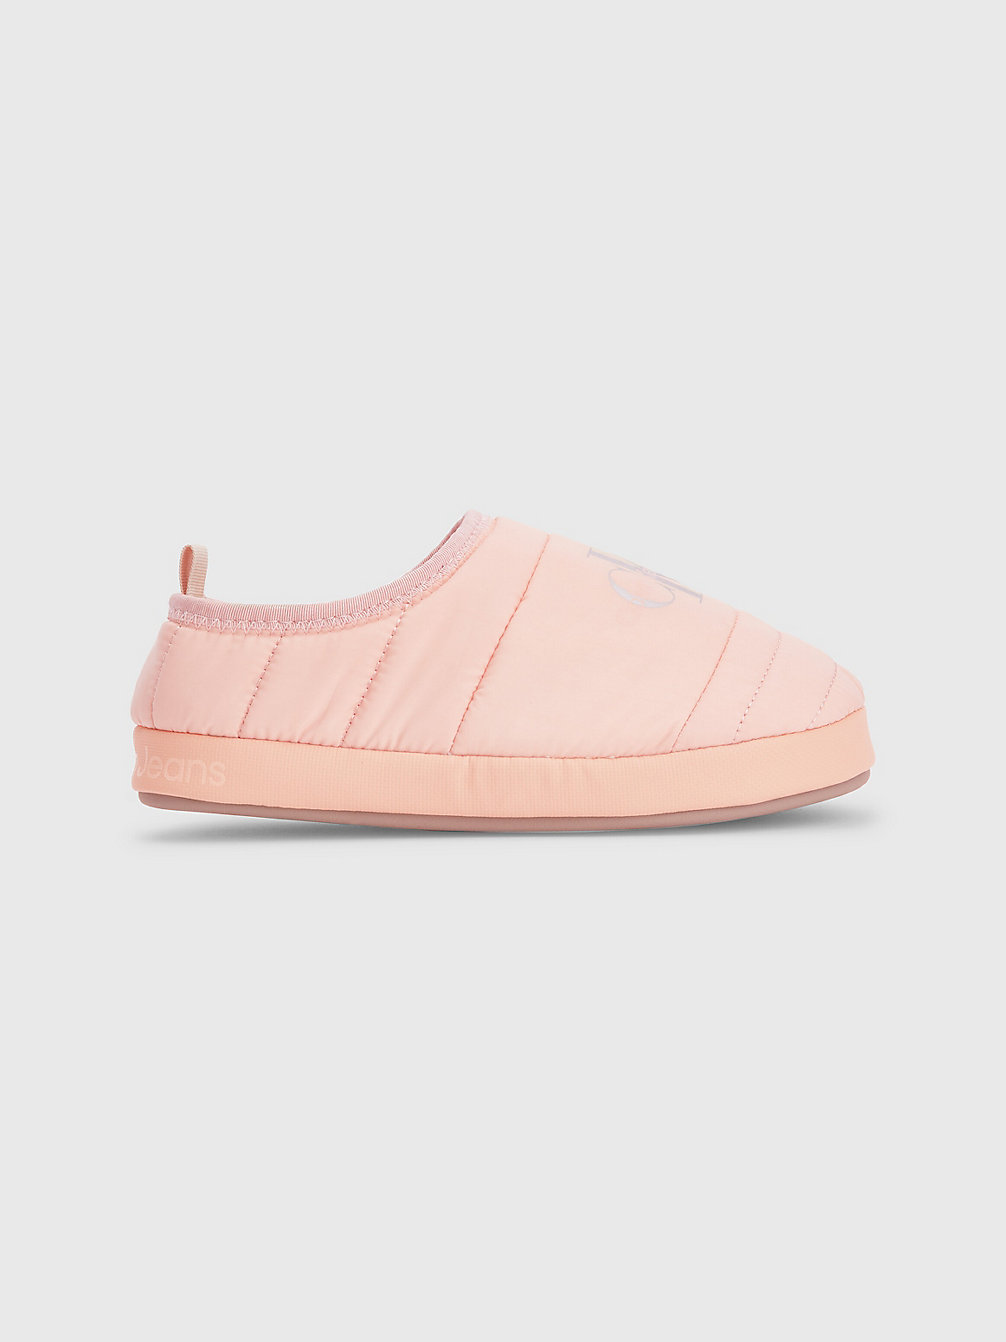 Pantofole Trapuntate Riciclate > PINK BLUSH > undefined donna > Calvin Klein